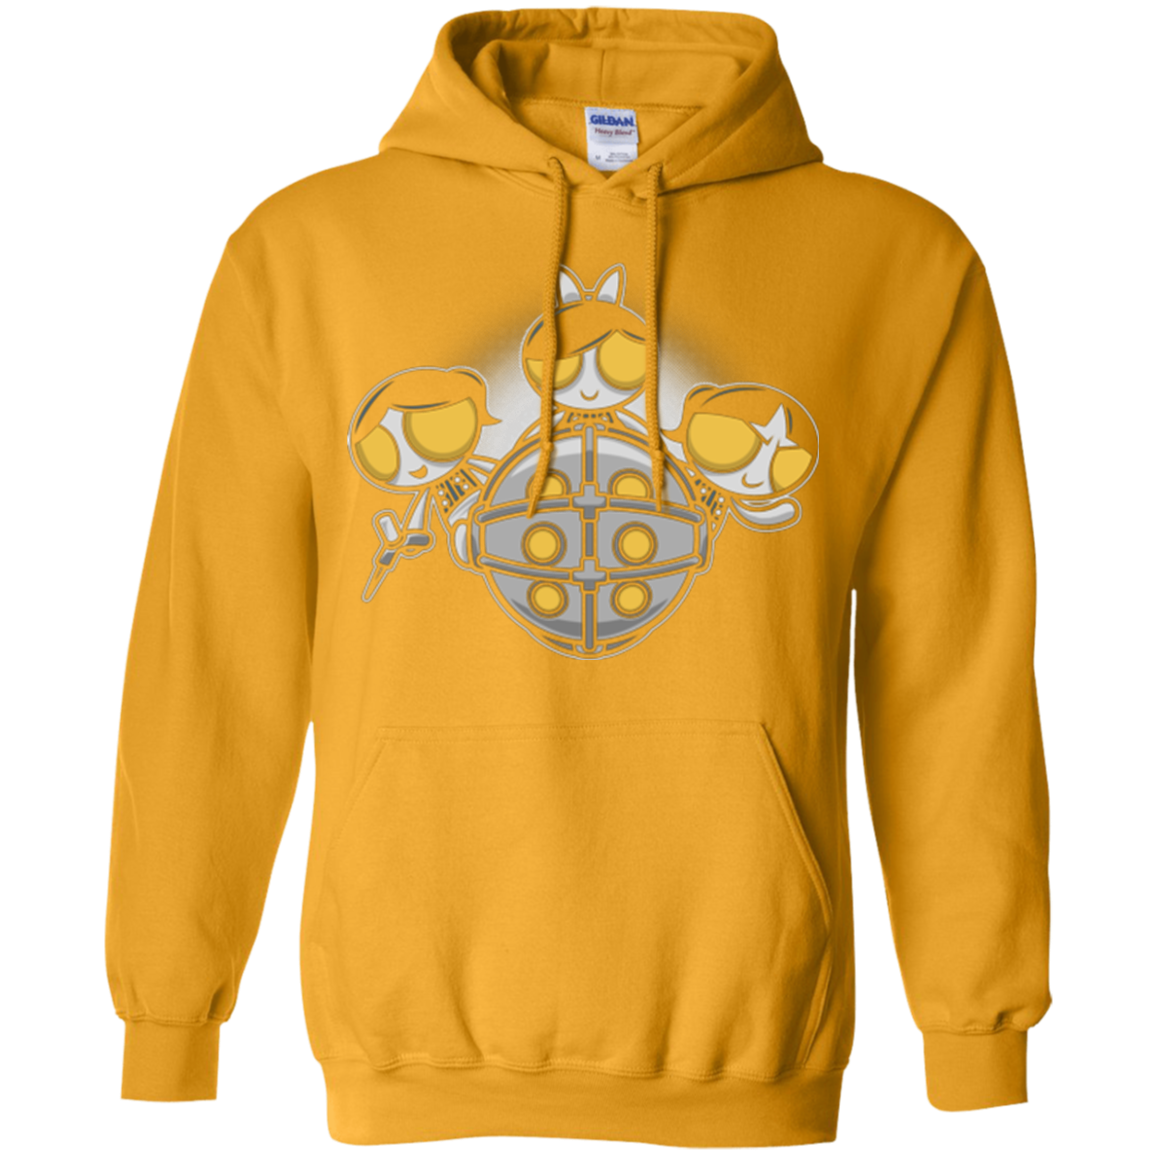 Sugar and Splice Pullover Hoodie